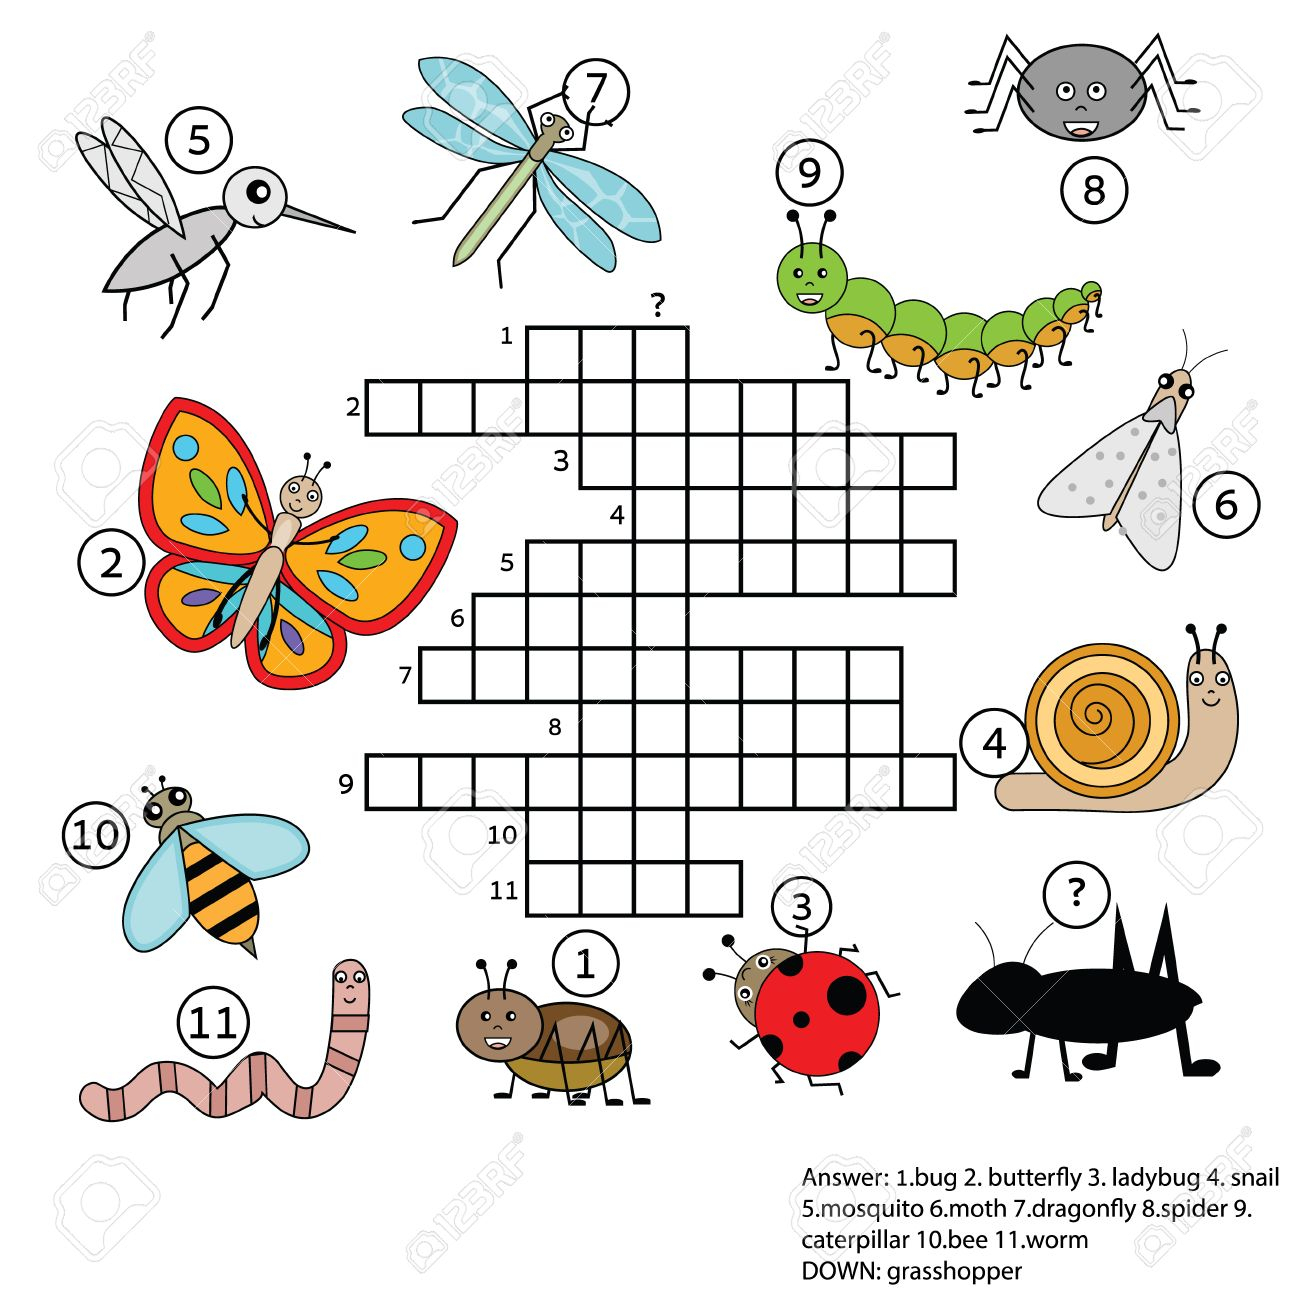 Insect Crossword Puzzle Printable Printable Crossword Puzzles